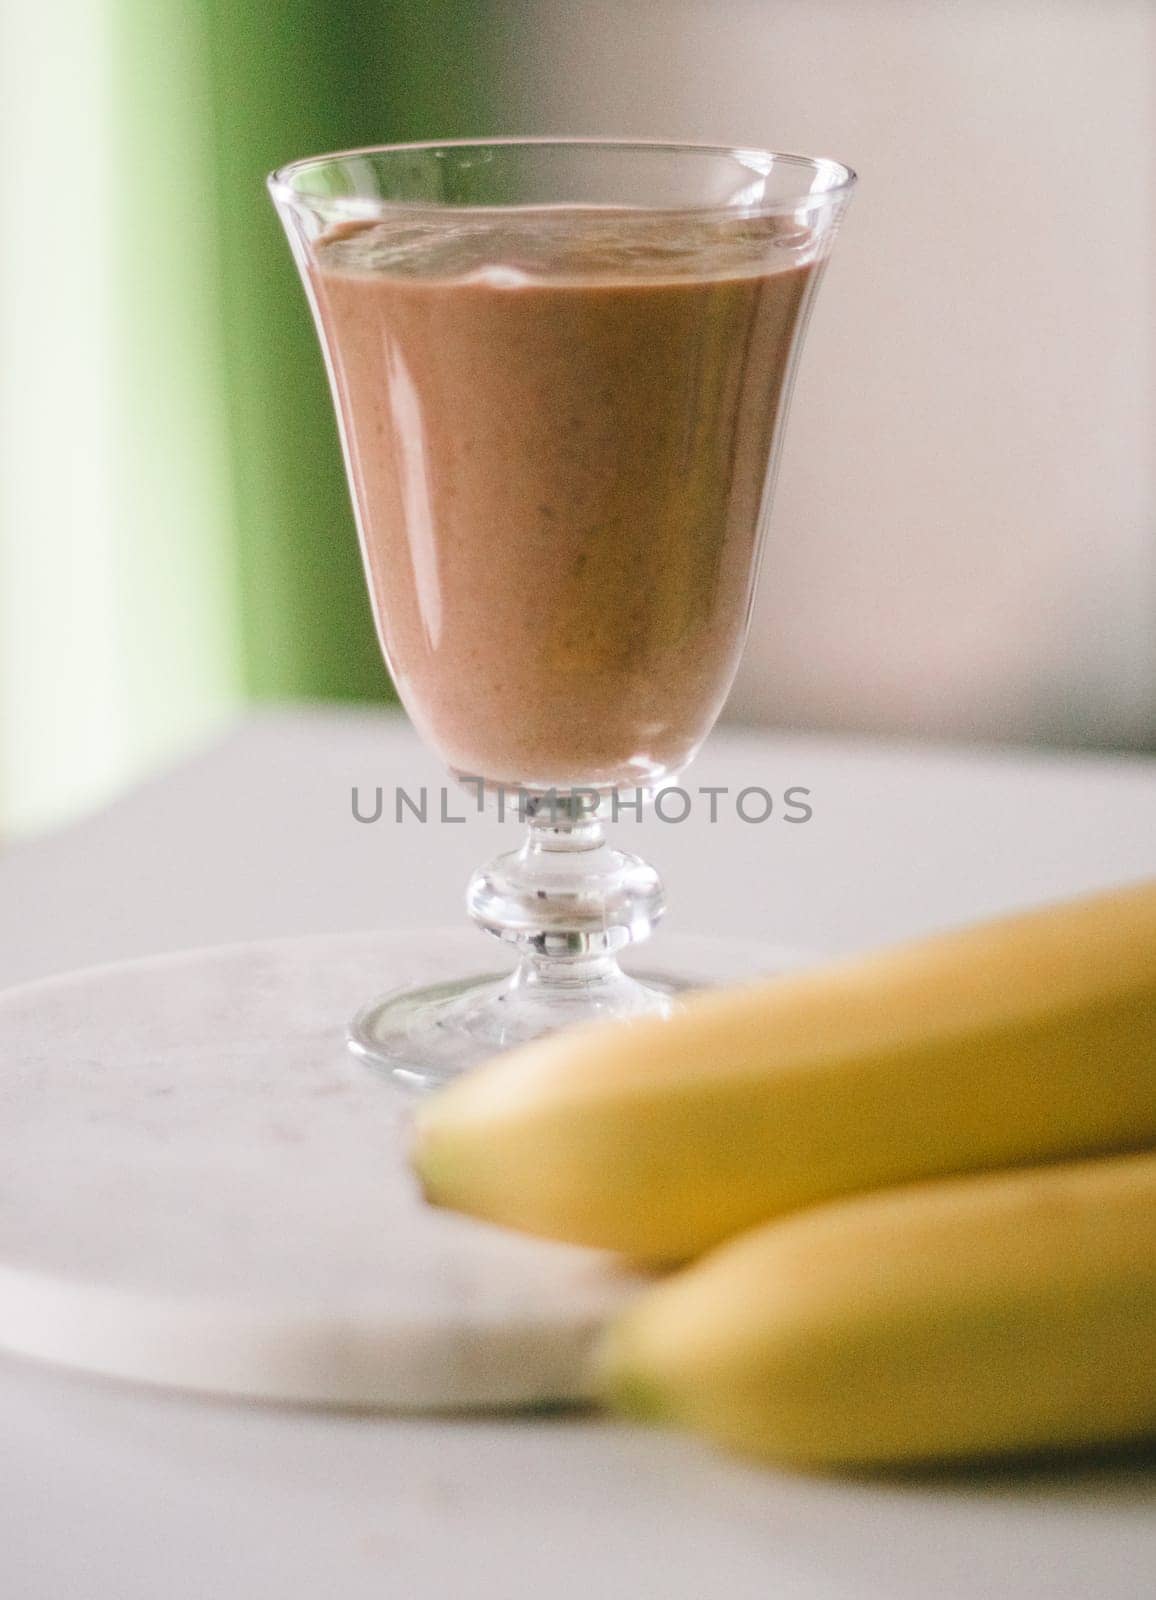 banana cocoa smoothie - healthy eating recipe styled concept, elegant visuals